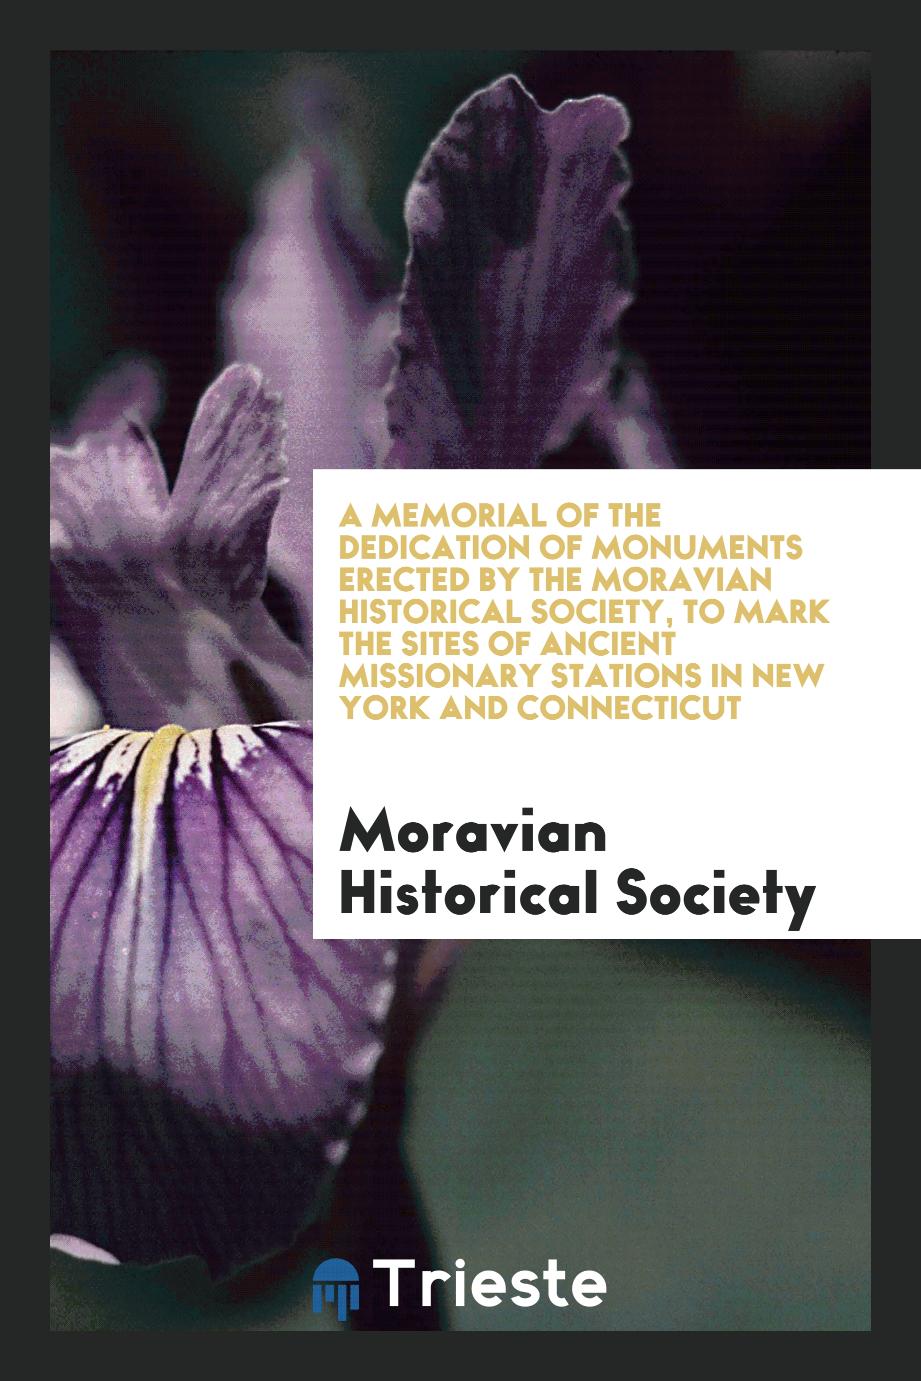 A Memorial of the Dedication of Monuments Erected by the Moravian Historical Society, to Mark the Sites of Ancient Missionary Stations in New York and Connecticut